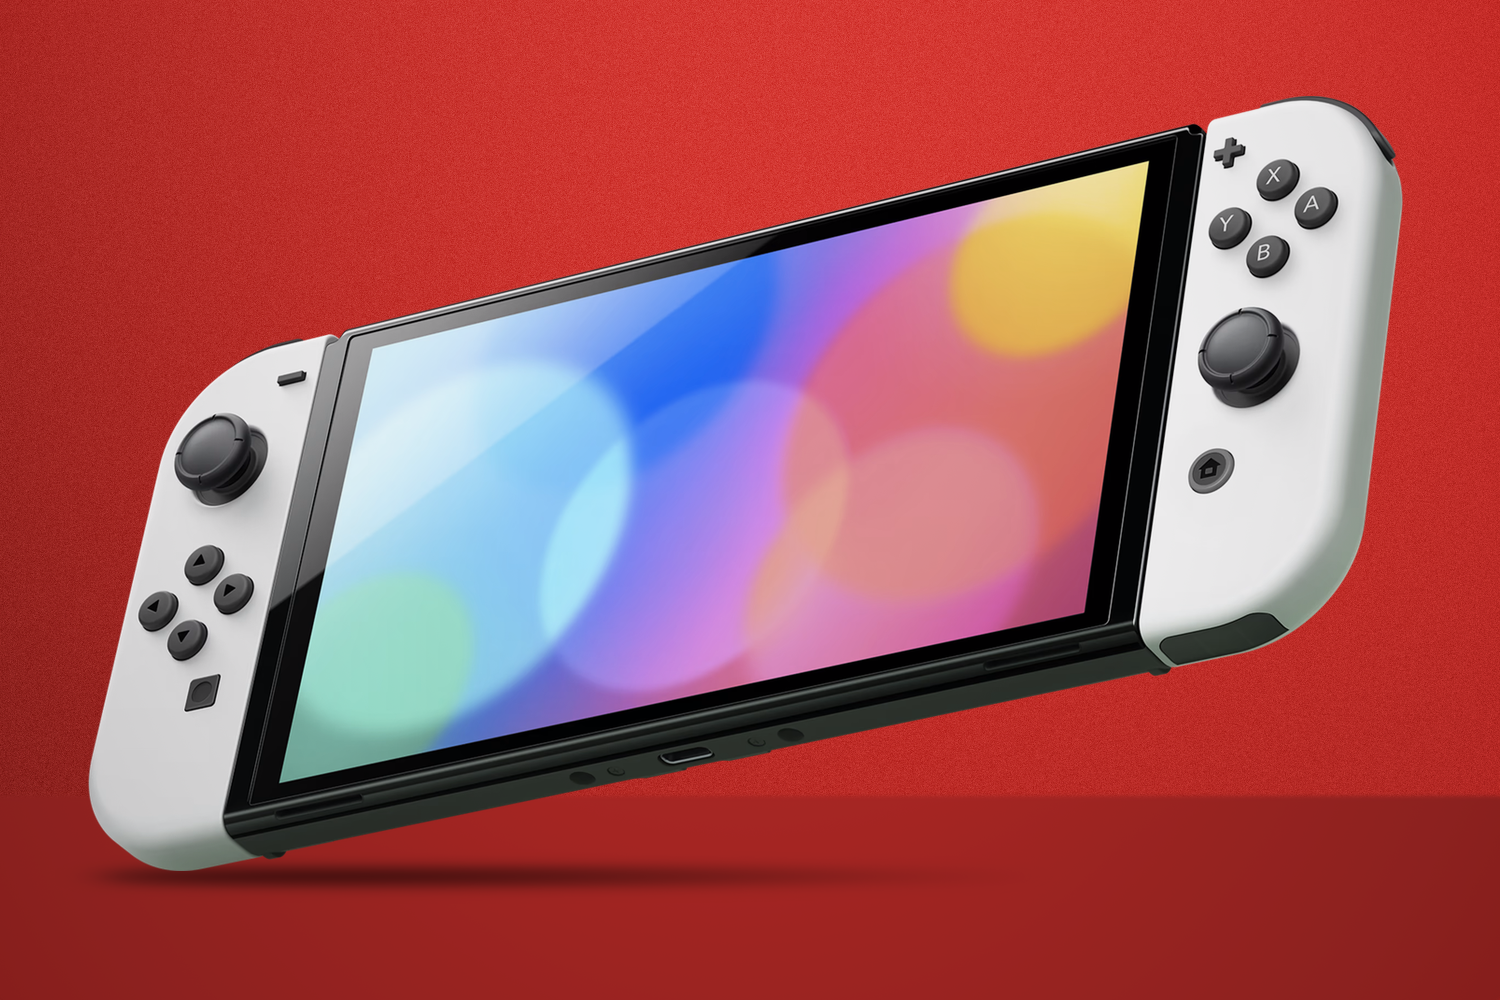 The Nintendo Switch just got a much easier version of the original